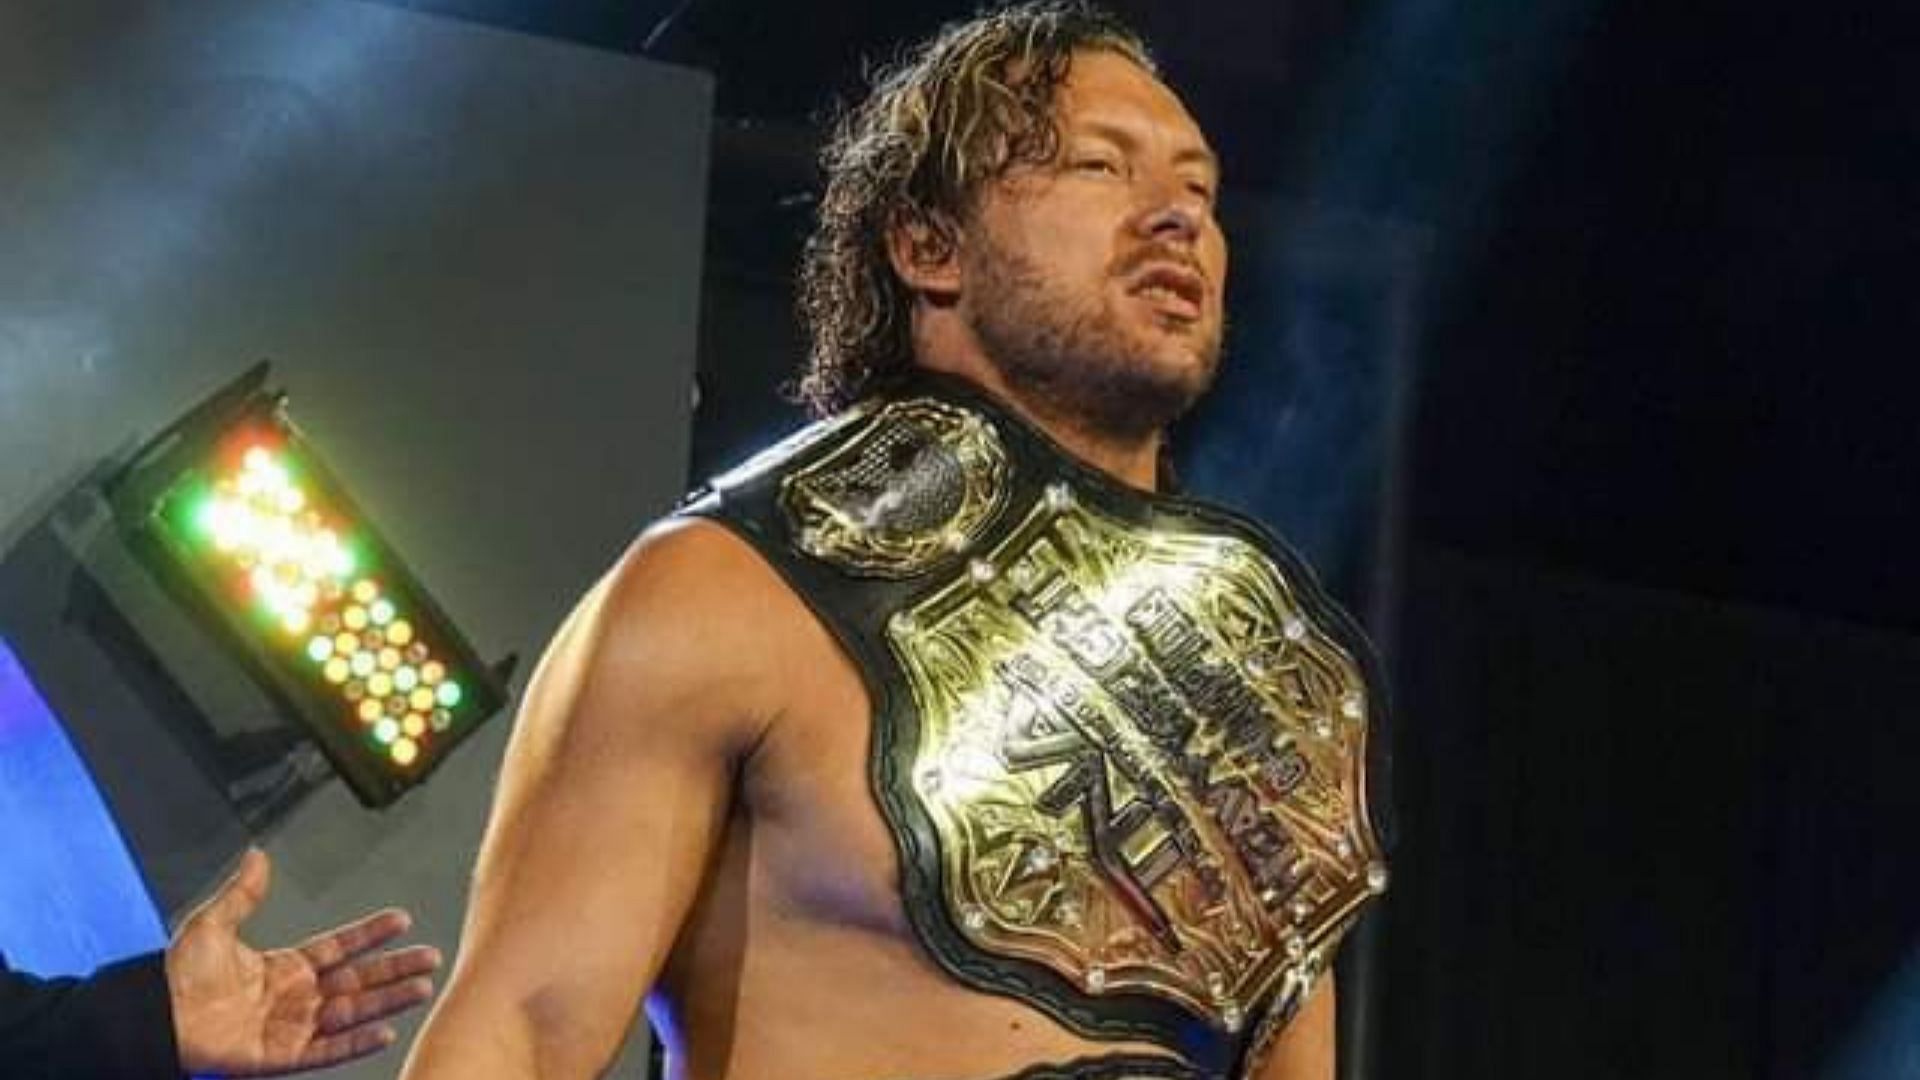 Kenny Omega making his entrance at AEW Double or Nothing 2021